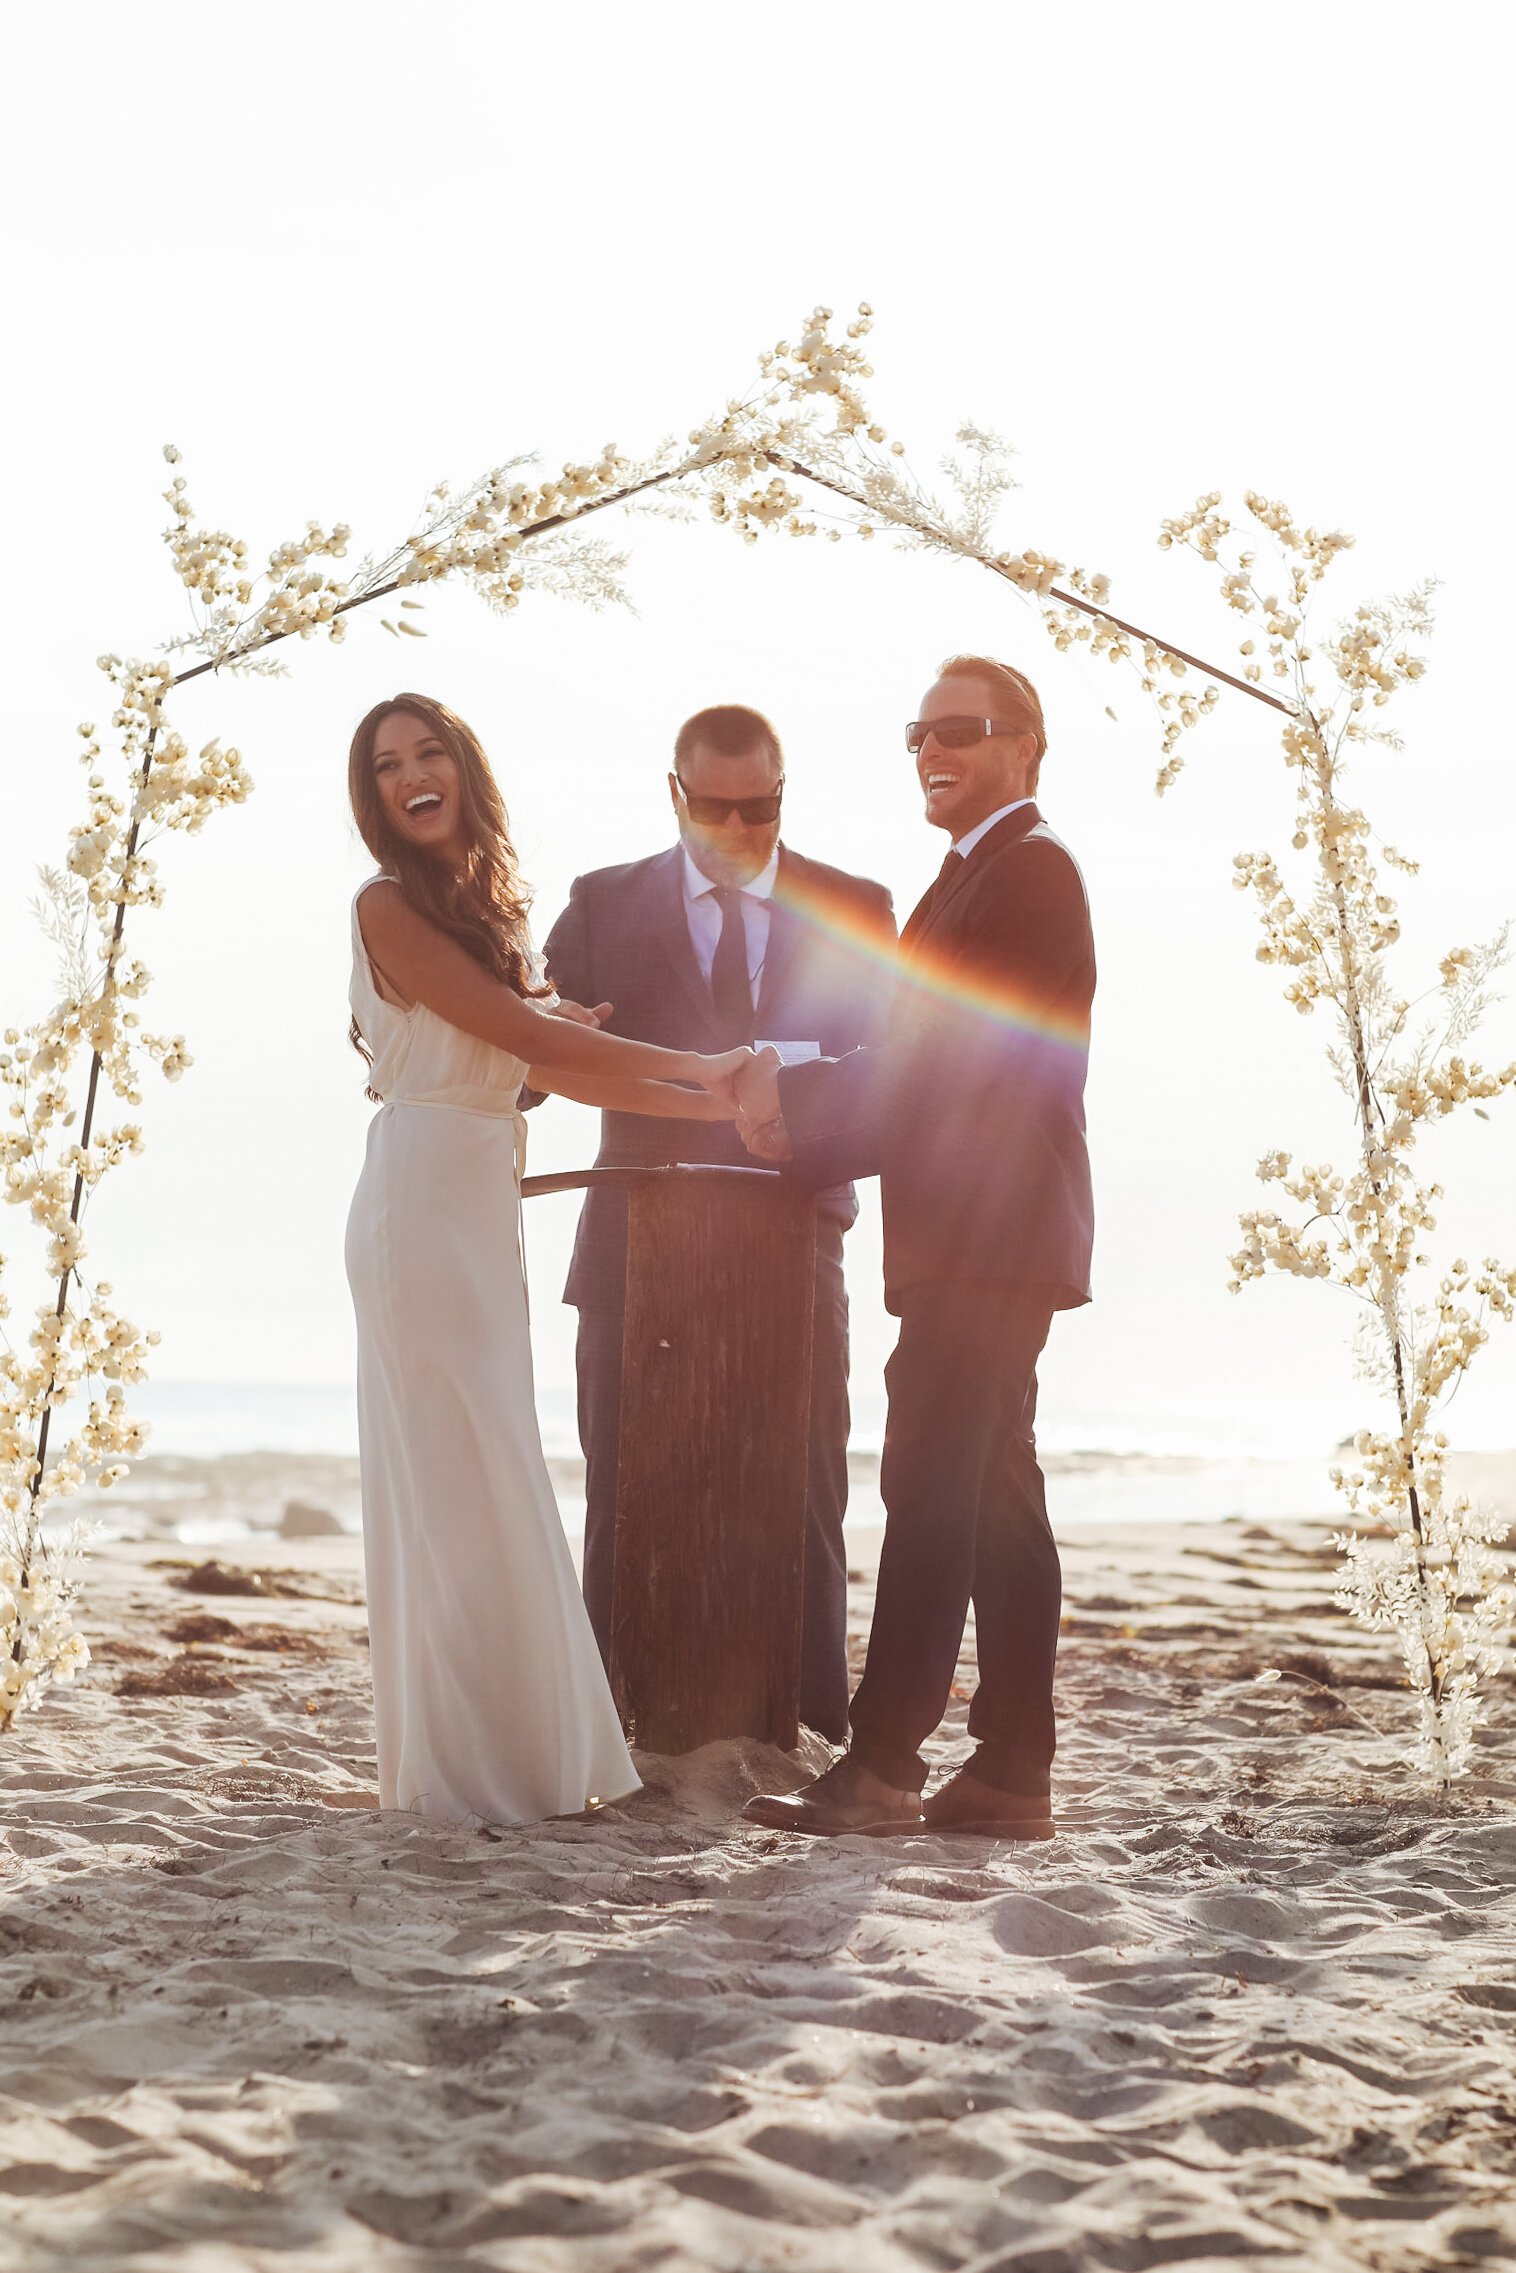 www.santabarbarawedding.com | Wunderland &amp; Co. | Sister B Studios Photography | Bride and Groom at the Altar with The Ocean in the Background 